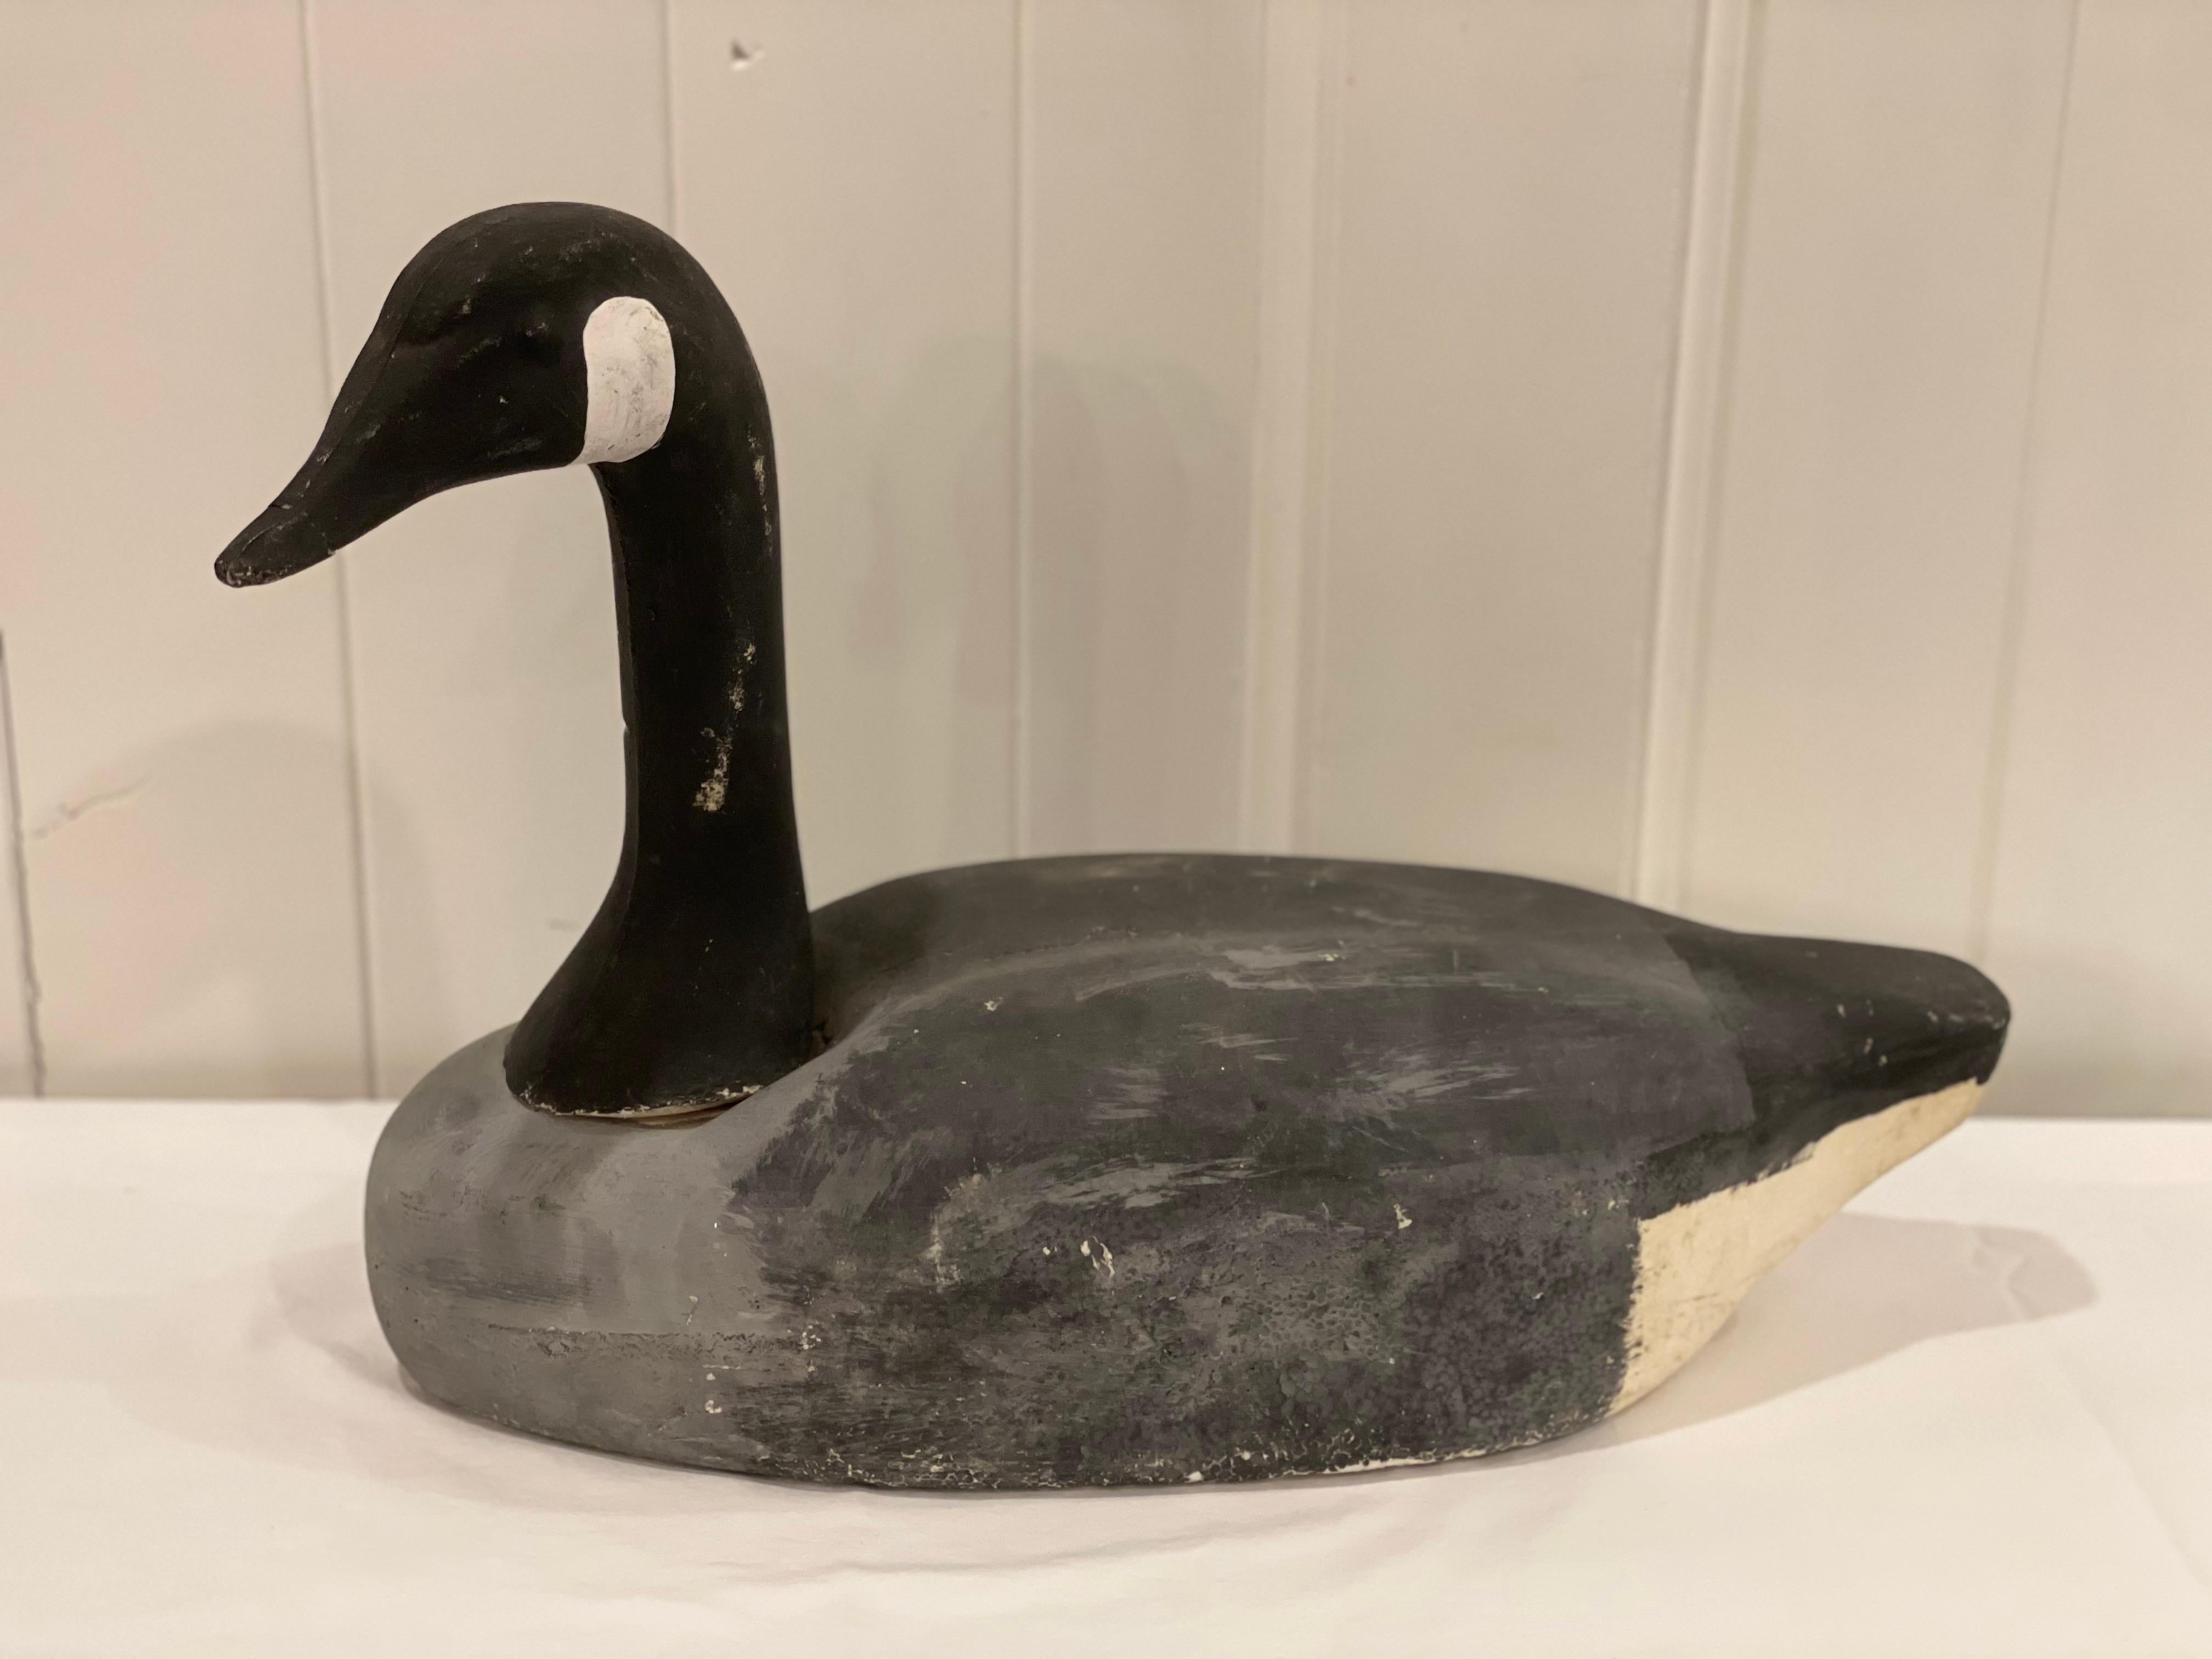 Vintage American Hand Painted Long Neck Goose Decoy. This gorgeous decoy has original paint and has seen many birds dropped over it, hence the great character it has. This goose decoy from Decoys Unlimited constructed in Clinton Iowa. Original